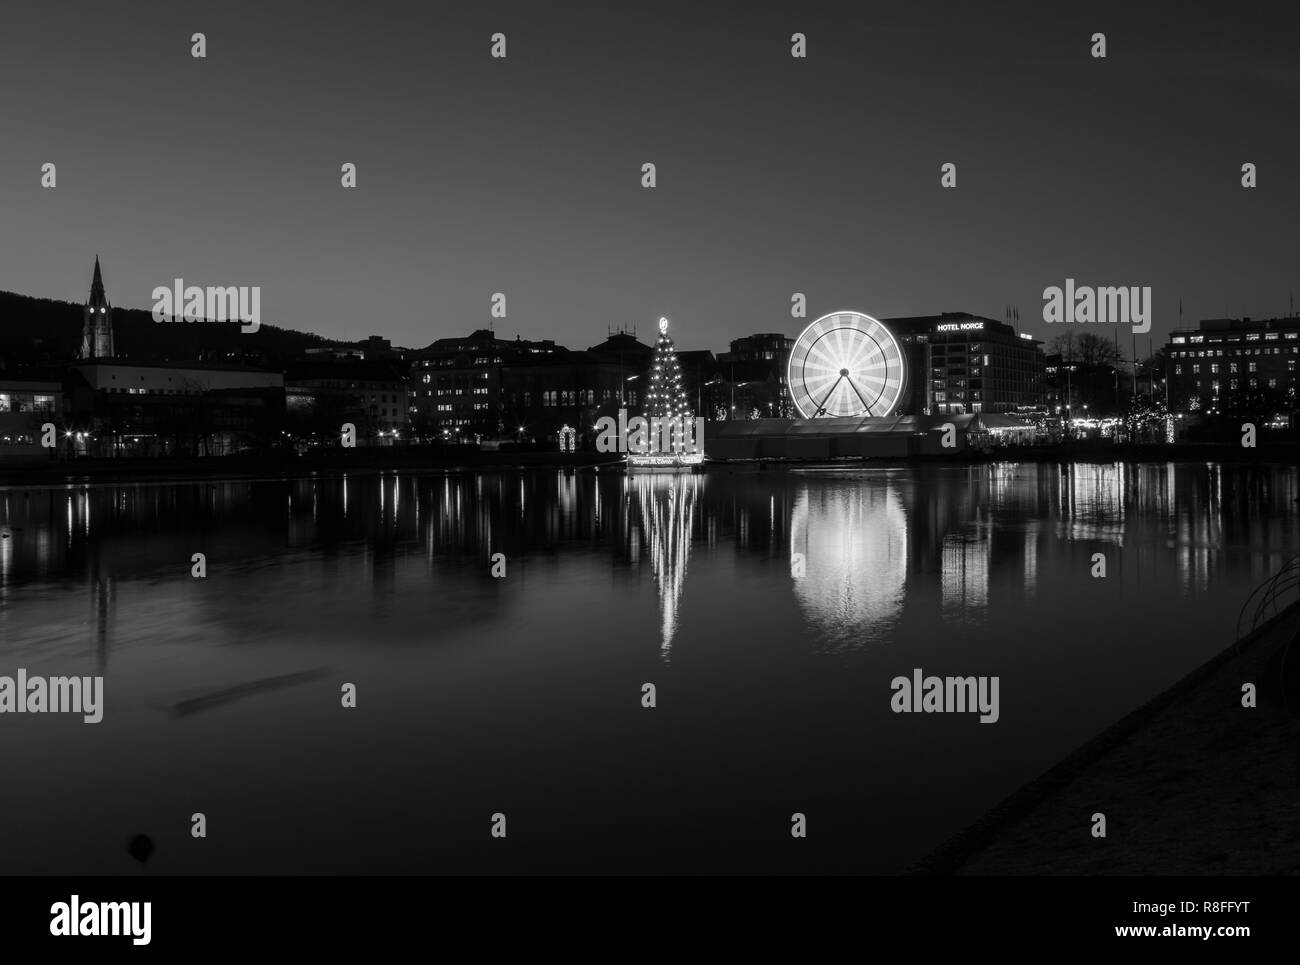 Christmas tree and Market by Lille Lungegaardsvannet Lake in downtown Bergen, Norway. Ferris wheel rotating. Stock Photo